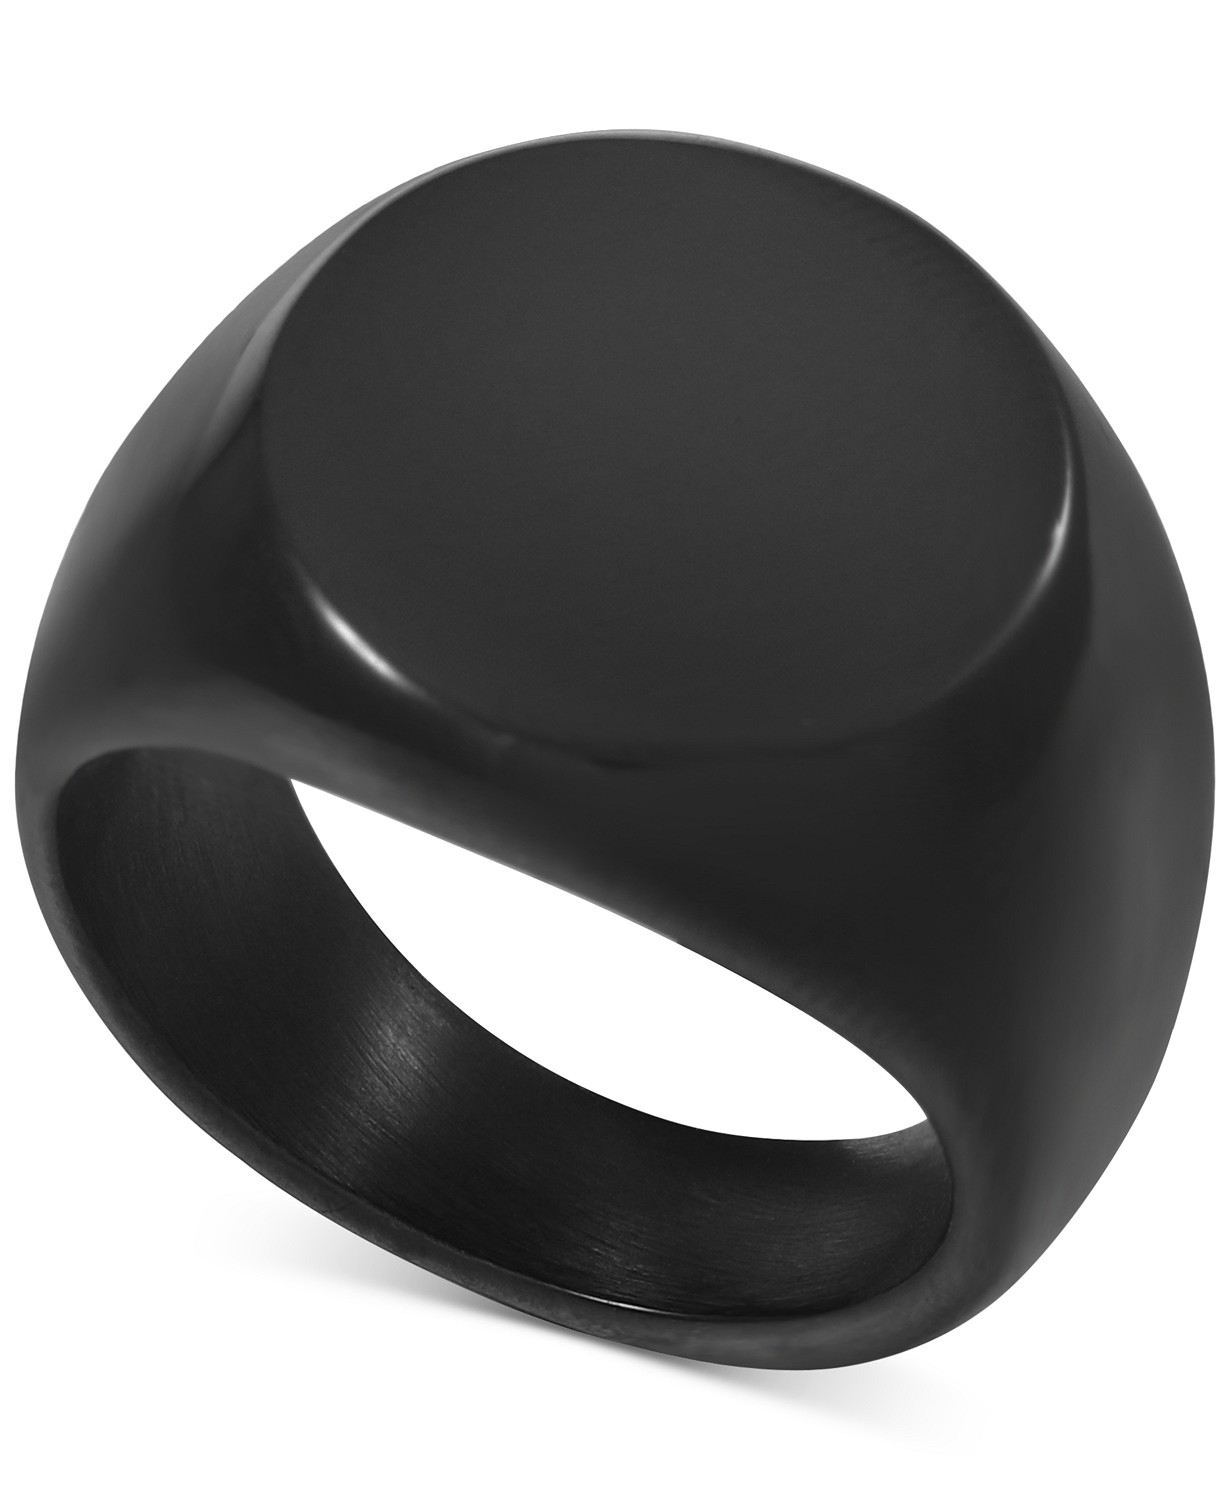 11 Awesome Insignia Rings for Men · Cladright